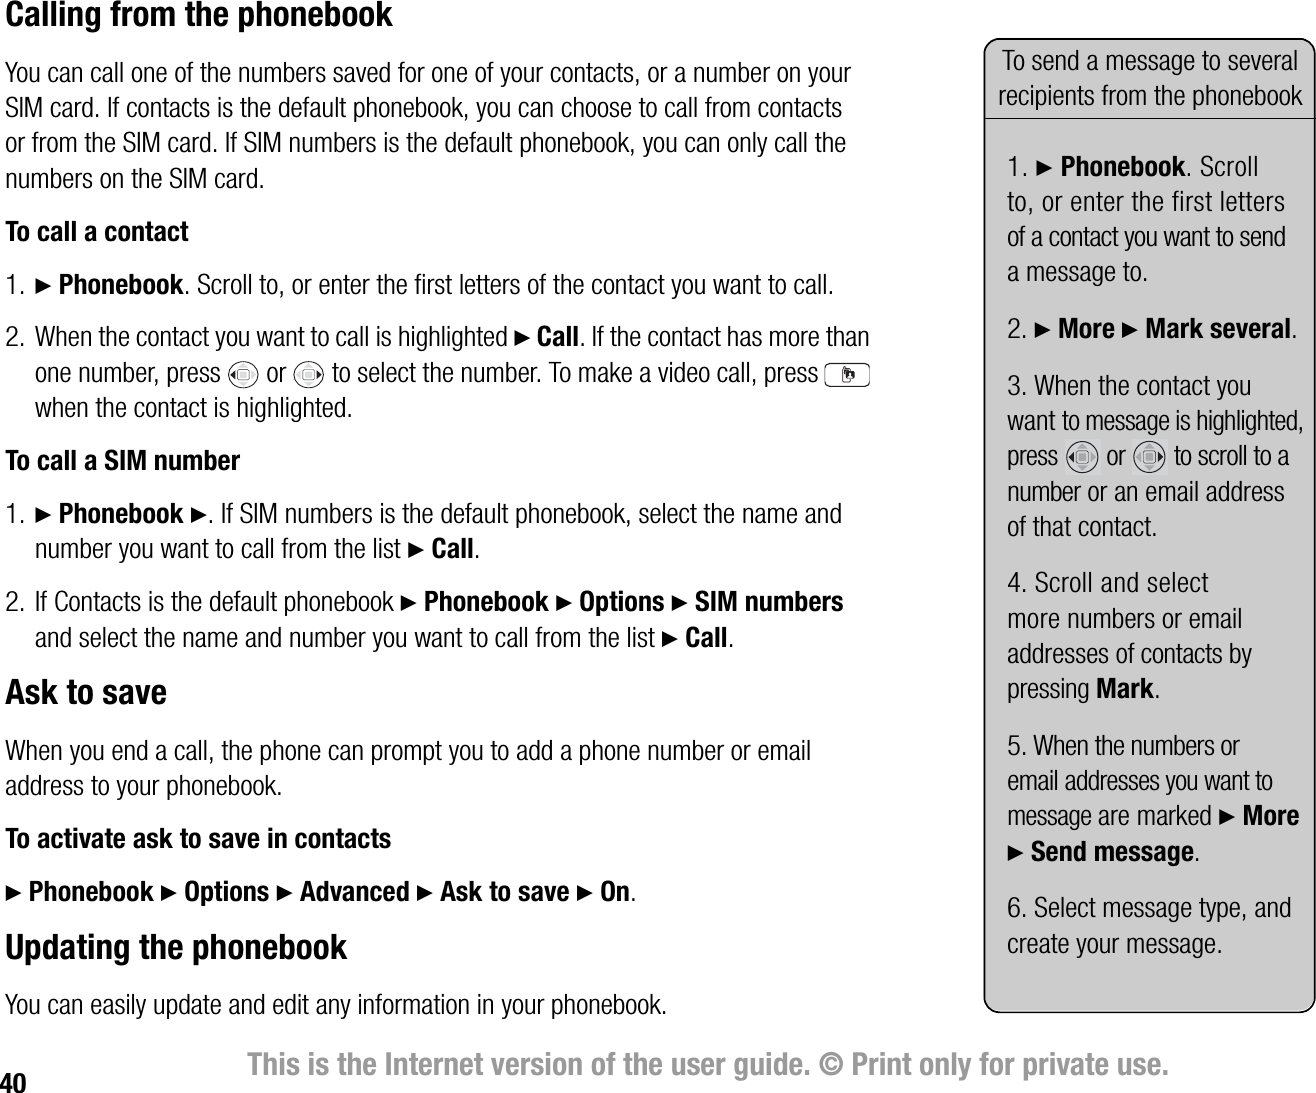 40 This is the Internet version of the user guide. © Print only for private use.Calling from the phonebookYou can call one of the numbers saved for one of your contacts, or a number on your SIM card. If contacts is the default phonebook, you can choose to call from contacts or from the SIM card. If SIM numbers is the default phonebook, you can only call the numbers on the SIM card.To call a contact1. } Phonebook. Scroll to, or enter the first letters of the contact you want to call.2. When the contact you want to call is highlighted } Call. If the contact has more than one number, press   or   to select the number. To make a video call, press   when the contact is highlighted.To call a SIM number1. } Phonebook }. If SIM numbers is the default phonebook, select the name and number you want to call from the list } Call.2. If Contacts is the default phonebook } Phonebook } Options } SIM numbers and select the name and number you want to call from the list } Call.Ask to saveWhen you end a call, the phone can prompt you to add a phone number or email address to your phonebook.To activate ask to save in contacts} Phonebook } Options } Advanced } Ask to save } On.Updating the phonebookYou can easily update and edit any information in your phonebook.To send a message to several recipients from the phonebook1. } Phonebook. Scroll to, or enter the first letters of a contact you want to send a message to.2. } More } Mark several.3. When the contact you want to message is highlighted, press   or   to scroll to a number or an email address of that contact. 4. Scroll and select more numbers or email addresses of contacts by pressing Mark.5. When the numbers or email addresses you want to message are marked } More } Send message.6. Select message type, and create your message.